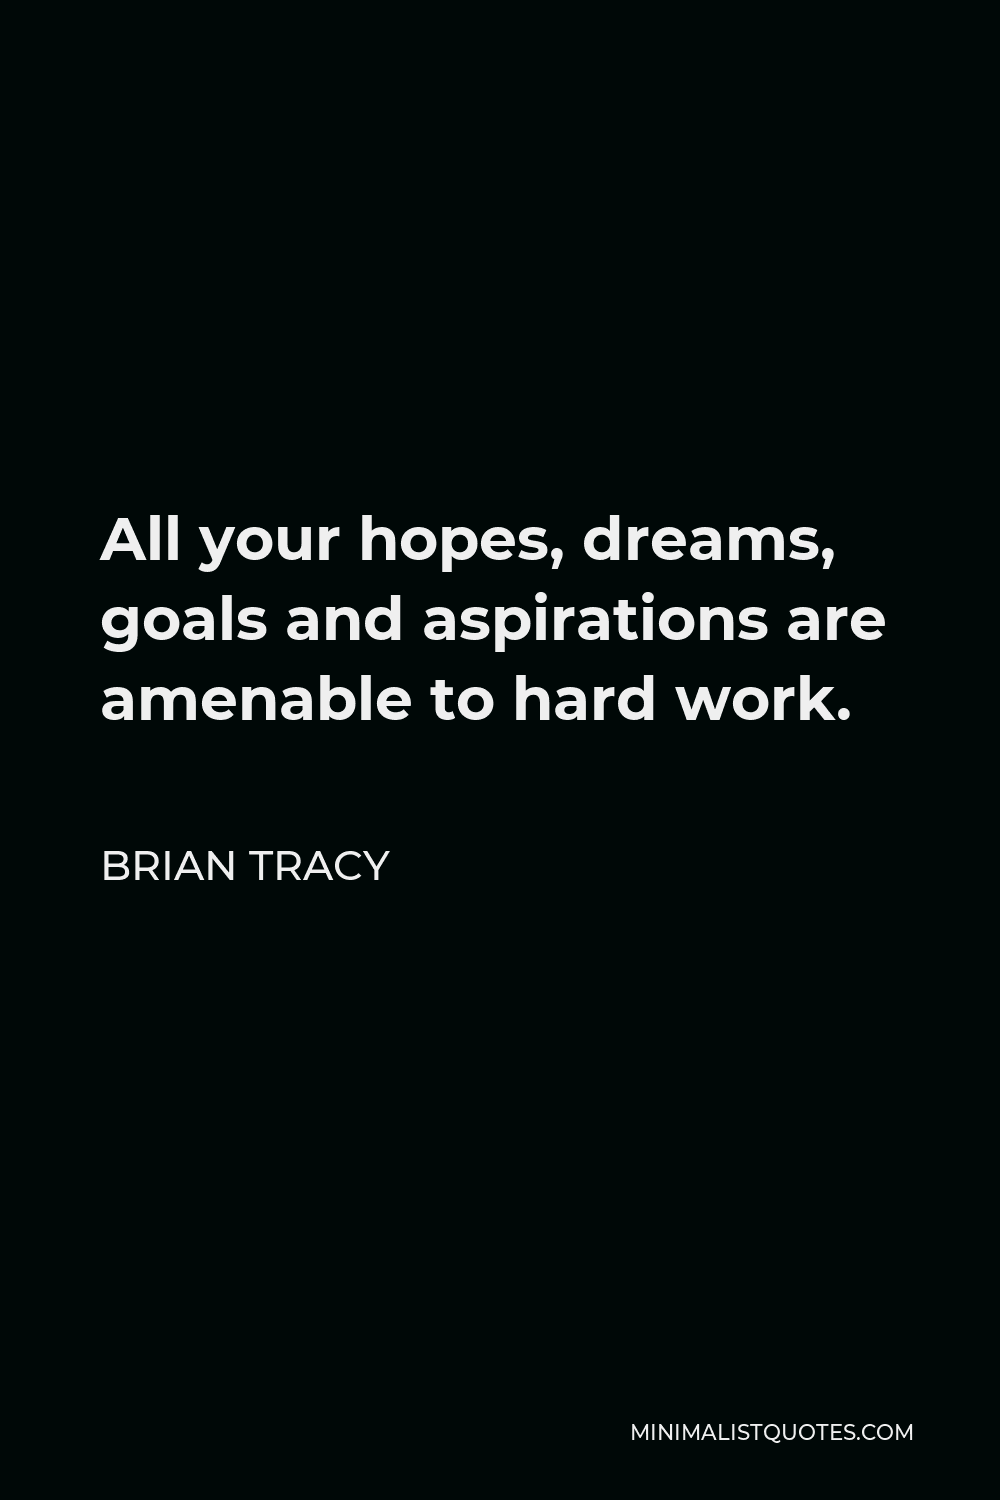 Brian Tracy Quote - All your hopes, dreams, goals and aspirations are amenable to hard work.